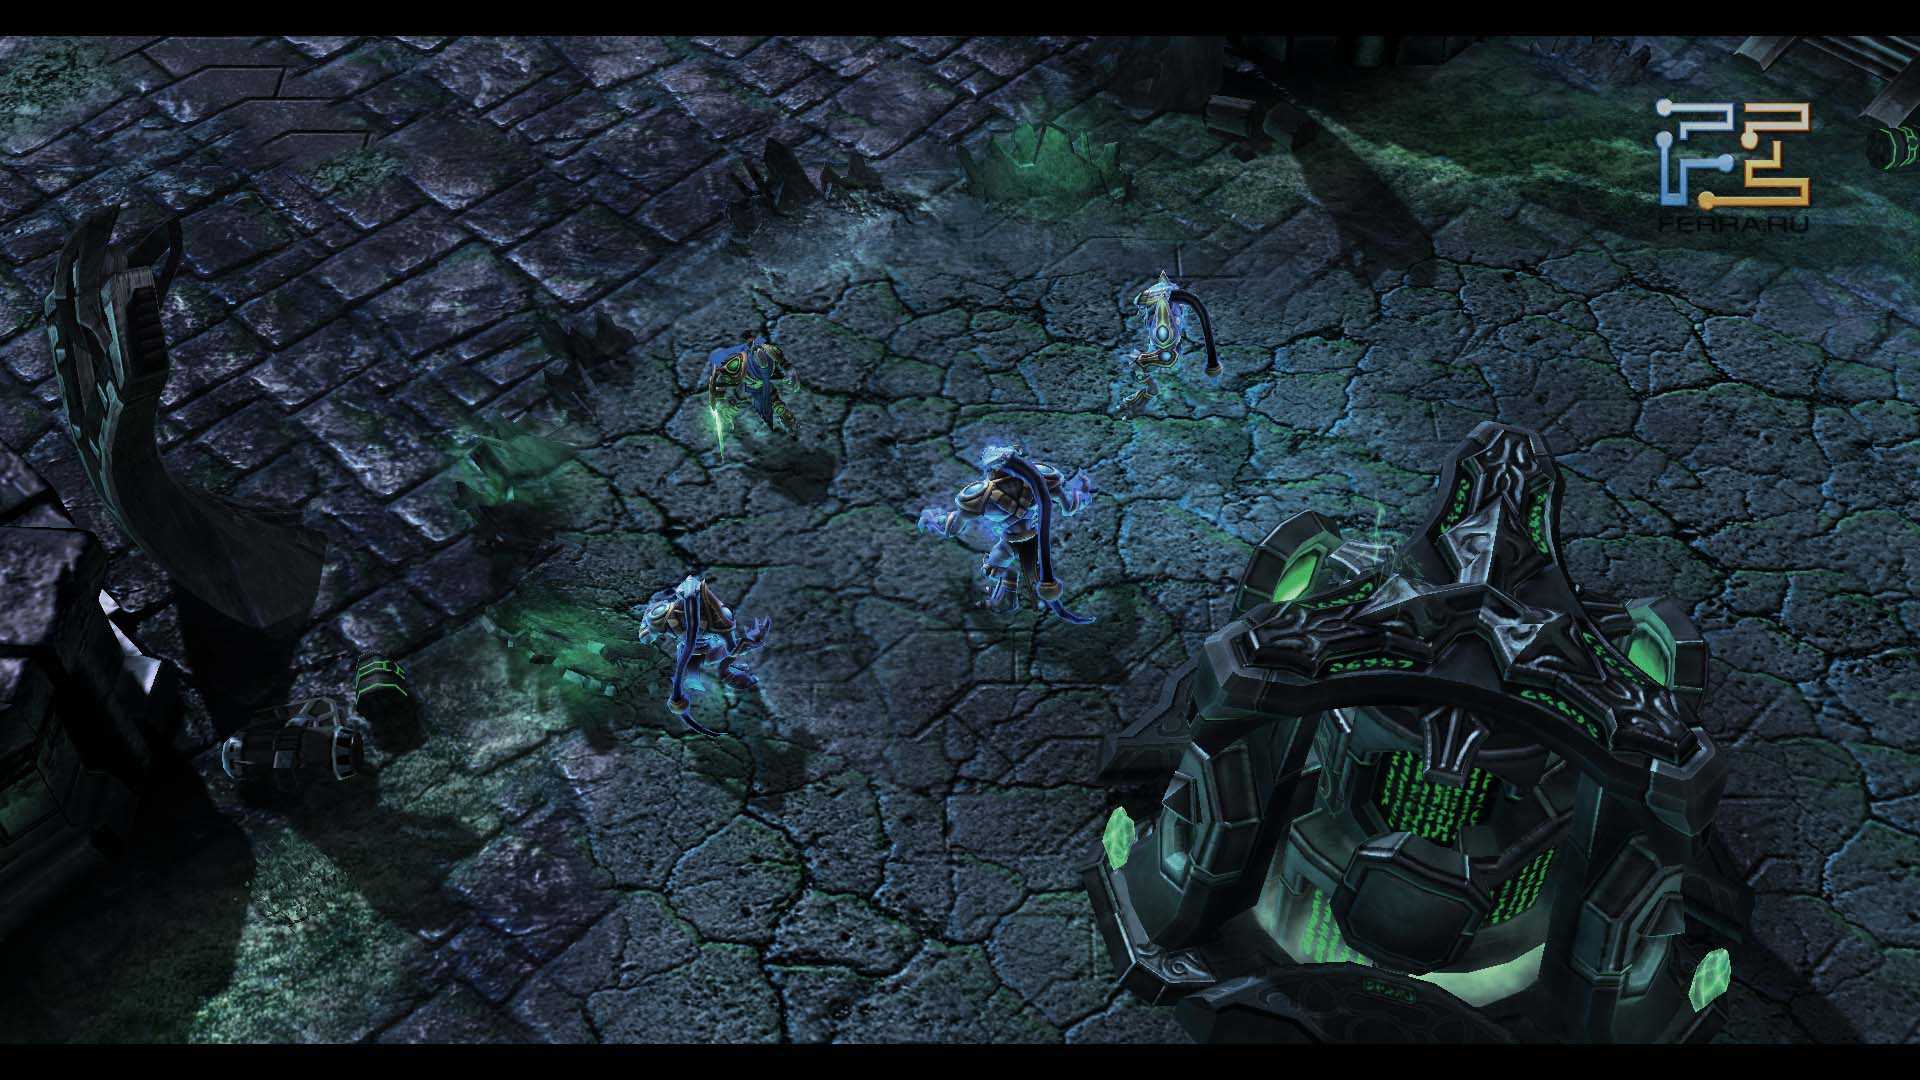 STARCRAFT 2 Wings of Liberty. STARCRAFT 2 системные требования на ПК. STARCRAFT 2 Legacy of the Void. Voices of the void radioactive